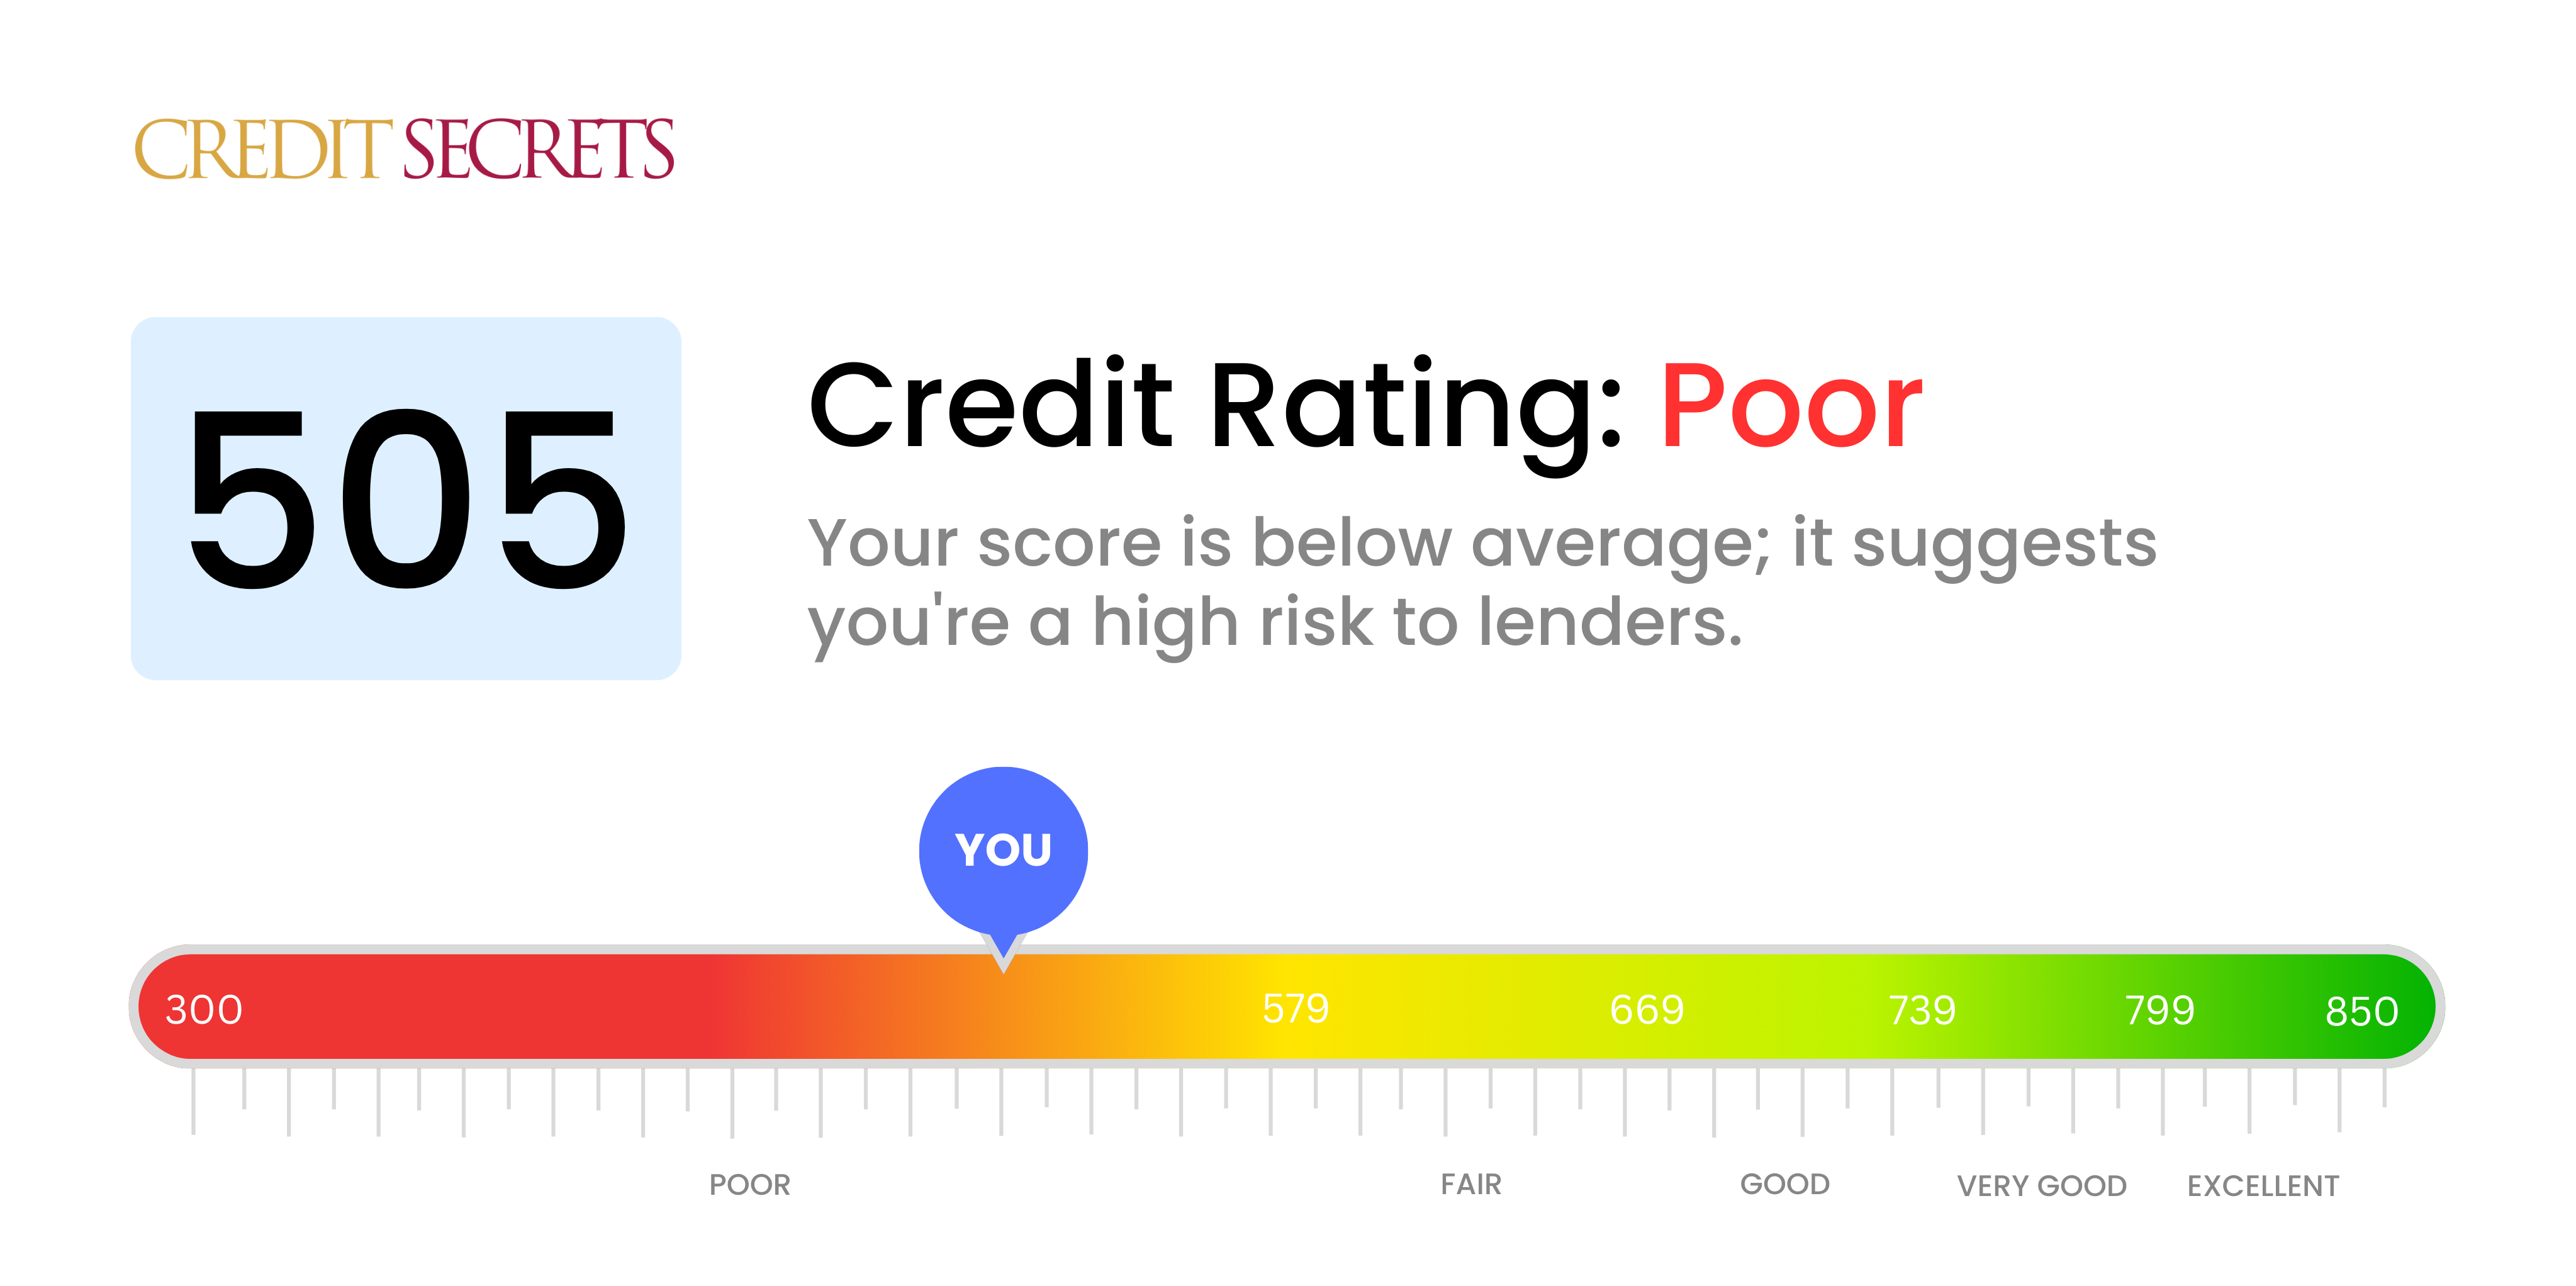 Is 505 a good credit score?